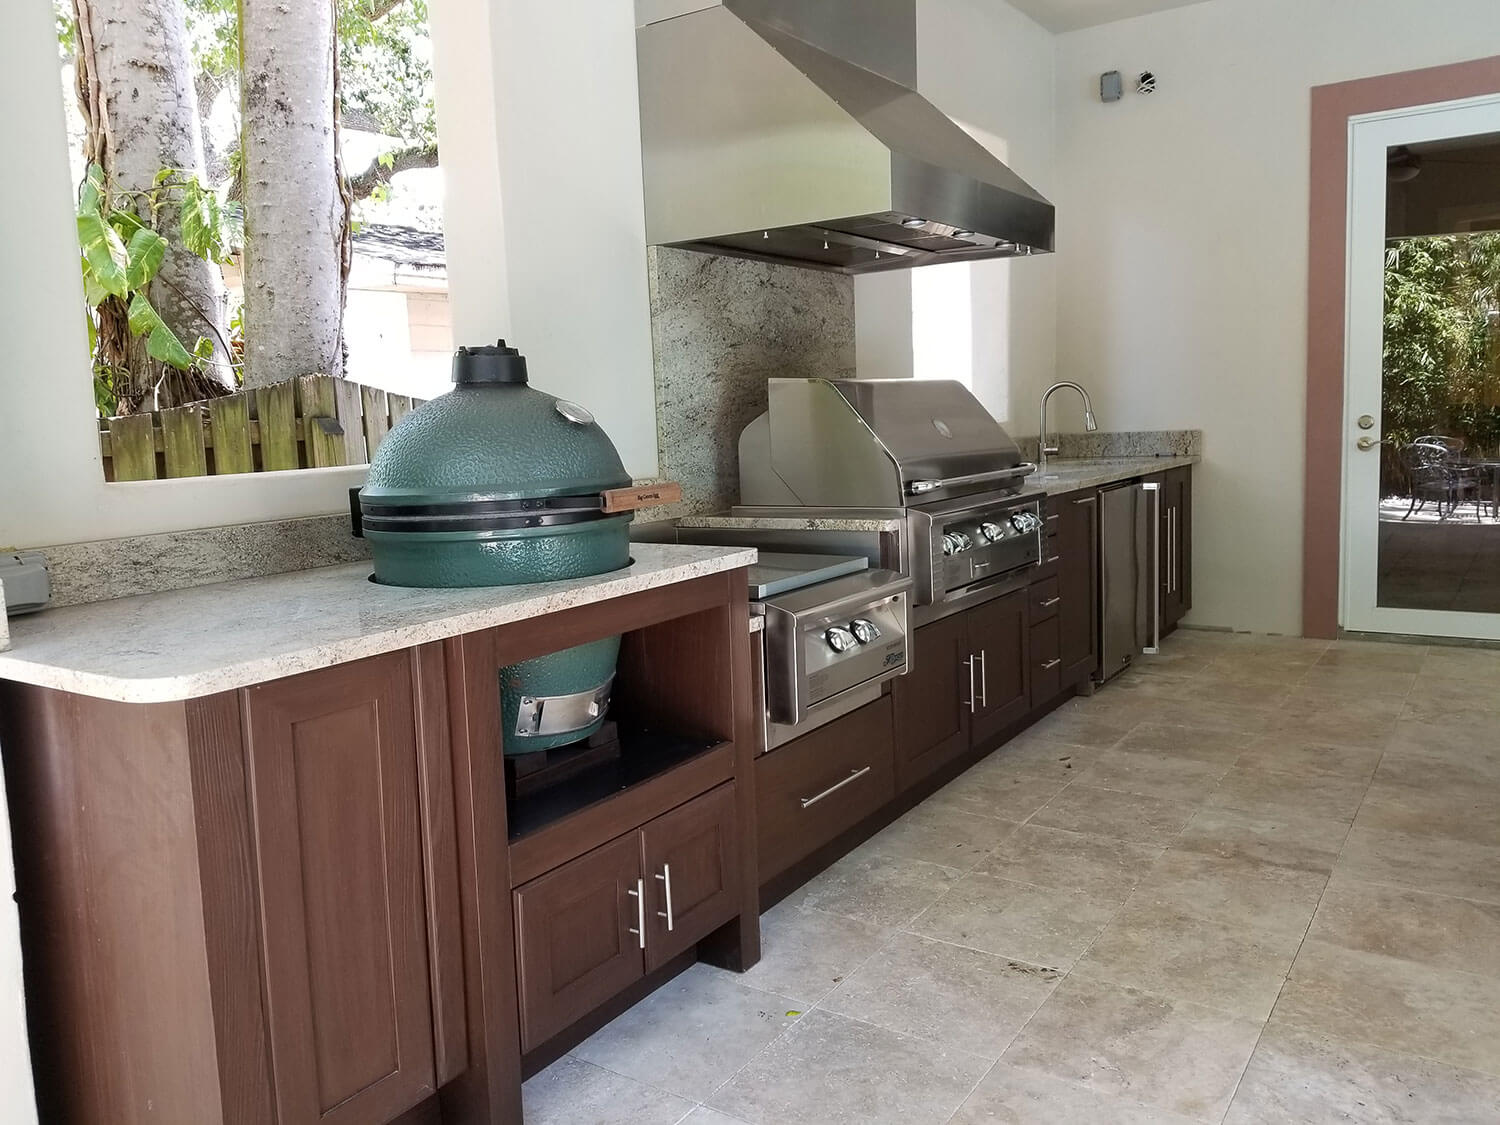 Extended Linear Outdoor Kitchen In South Tampa - Just Grillin Outdoor